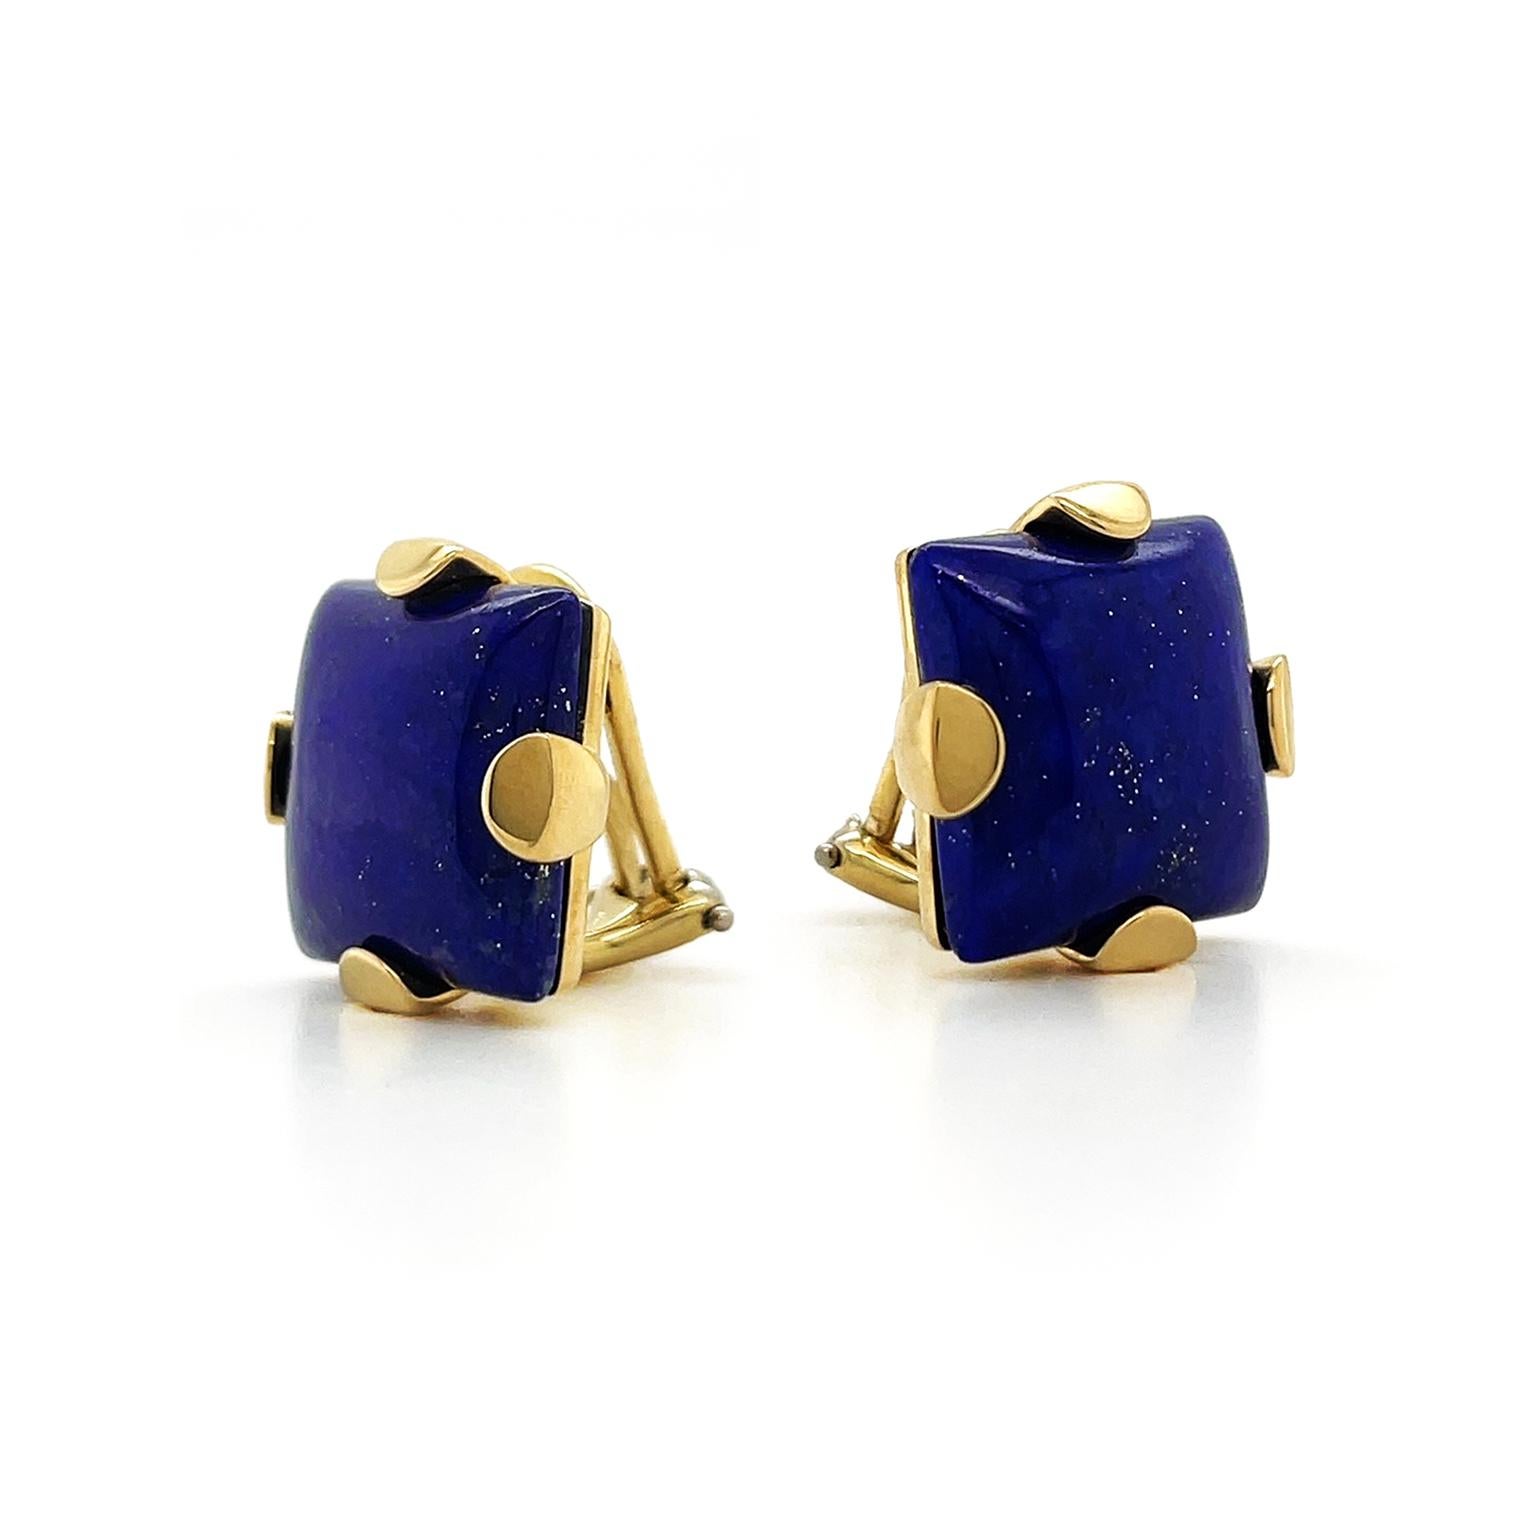 The profound tone of the Lapis lazuli is elevated by being carved into a square cabochon. 18k yellow gold prongs secure the gem, while also heightening its shimmery gold flecks. The total weight of the lapis lazuli is 21.28 carats. Clip-backs